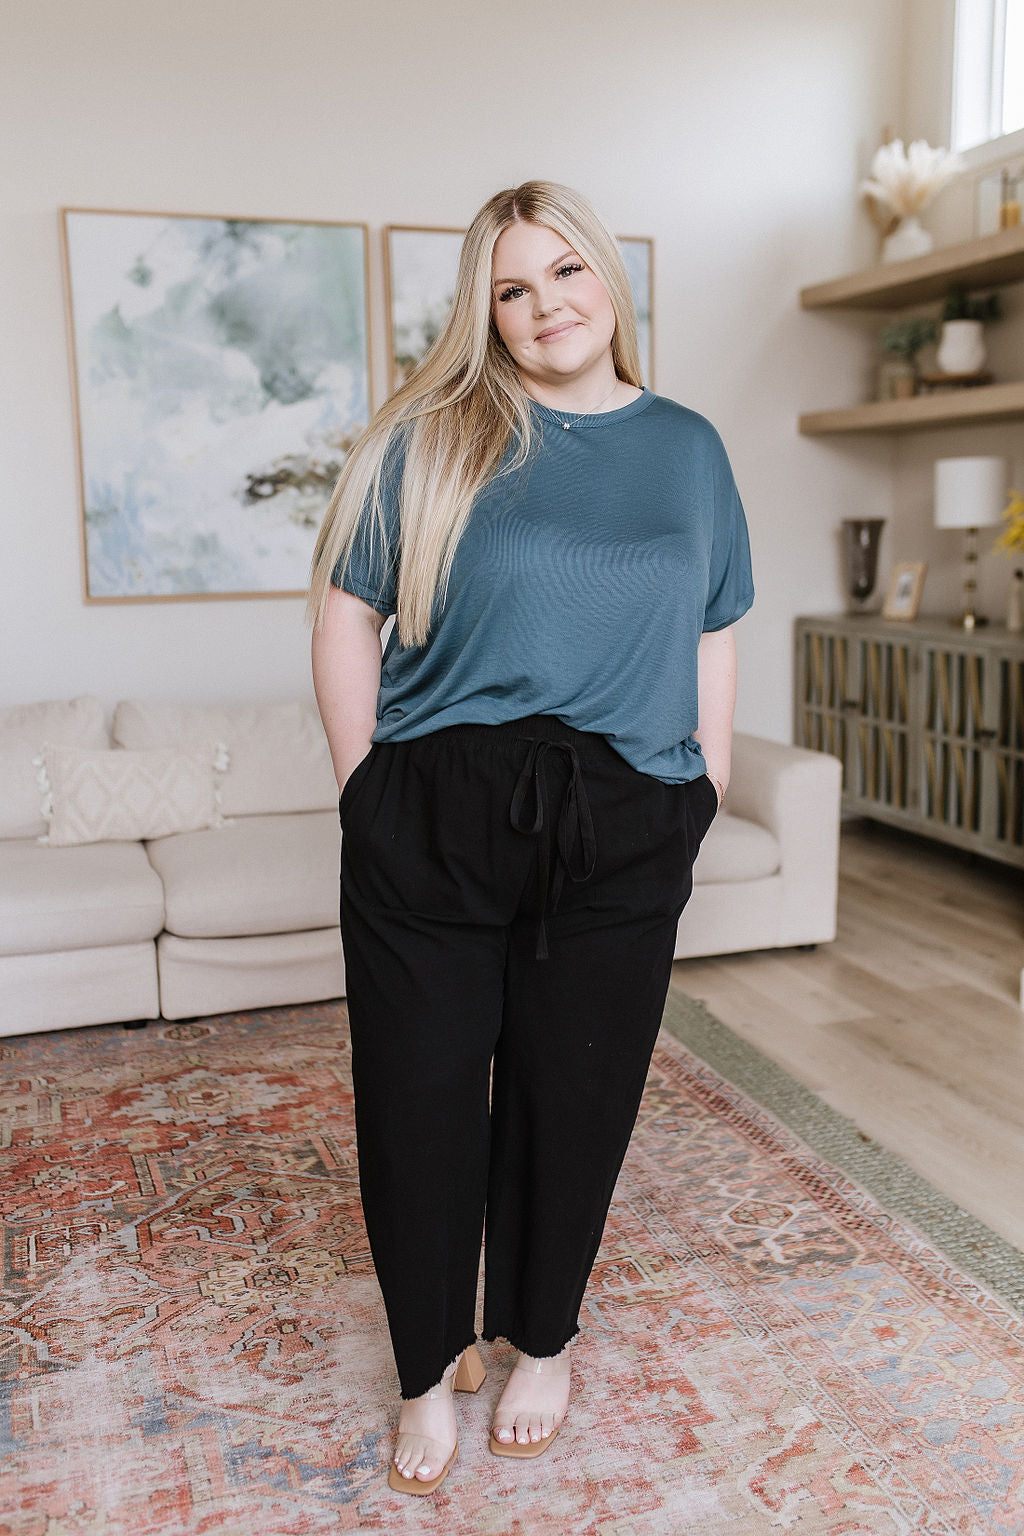 So Good Relaxed Fit Top in Dark Teal - 6/22/2023